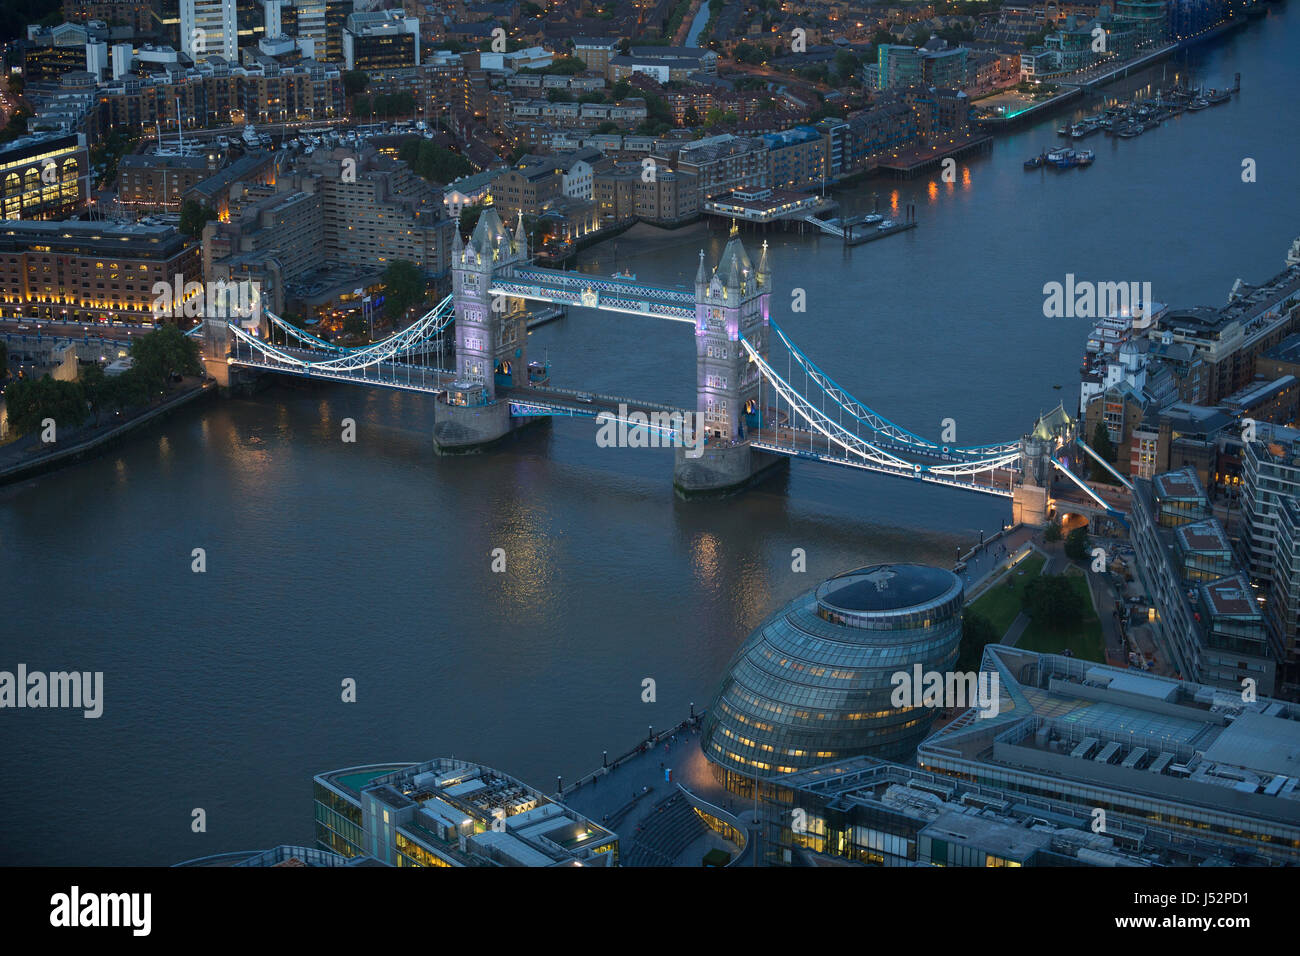 Aerial view of London at night. The river Thames, Tower Bridge and urban buildings in view. Stock Photo